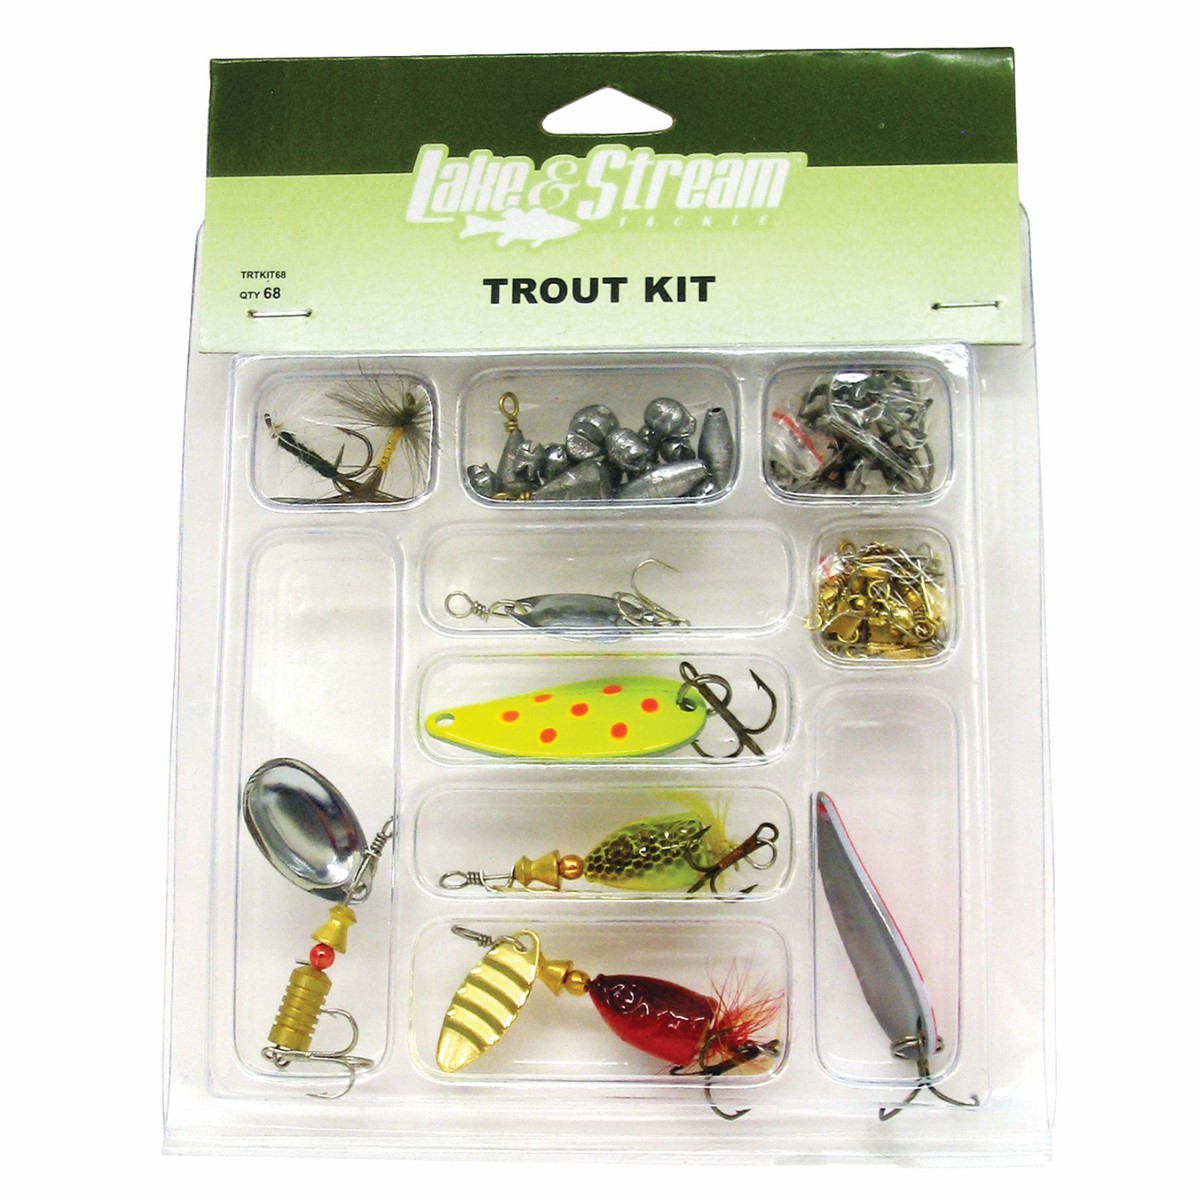 Eagle Claw - Baitholder Snell - Tackle Depot